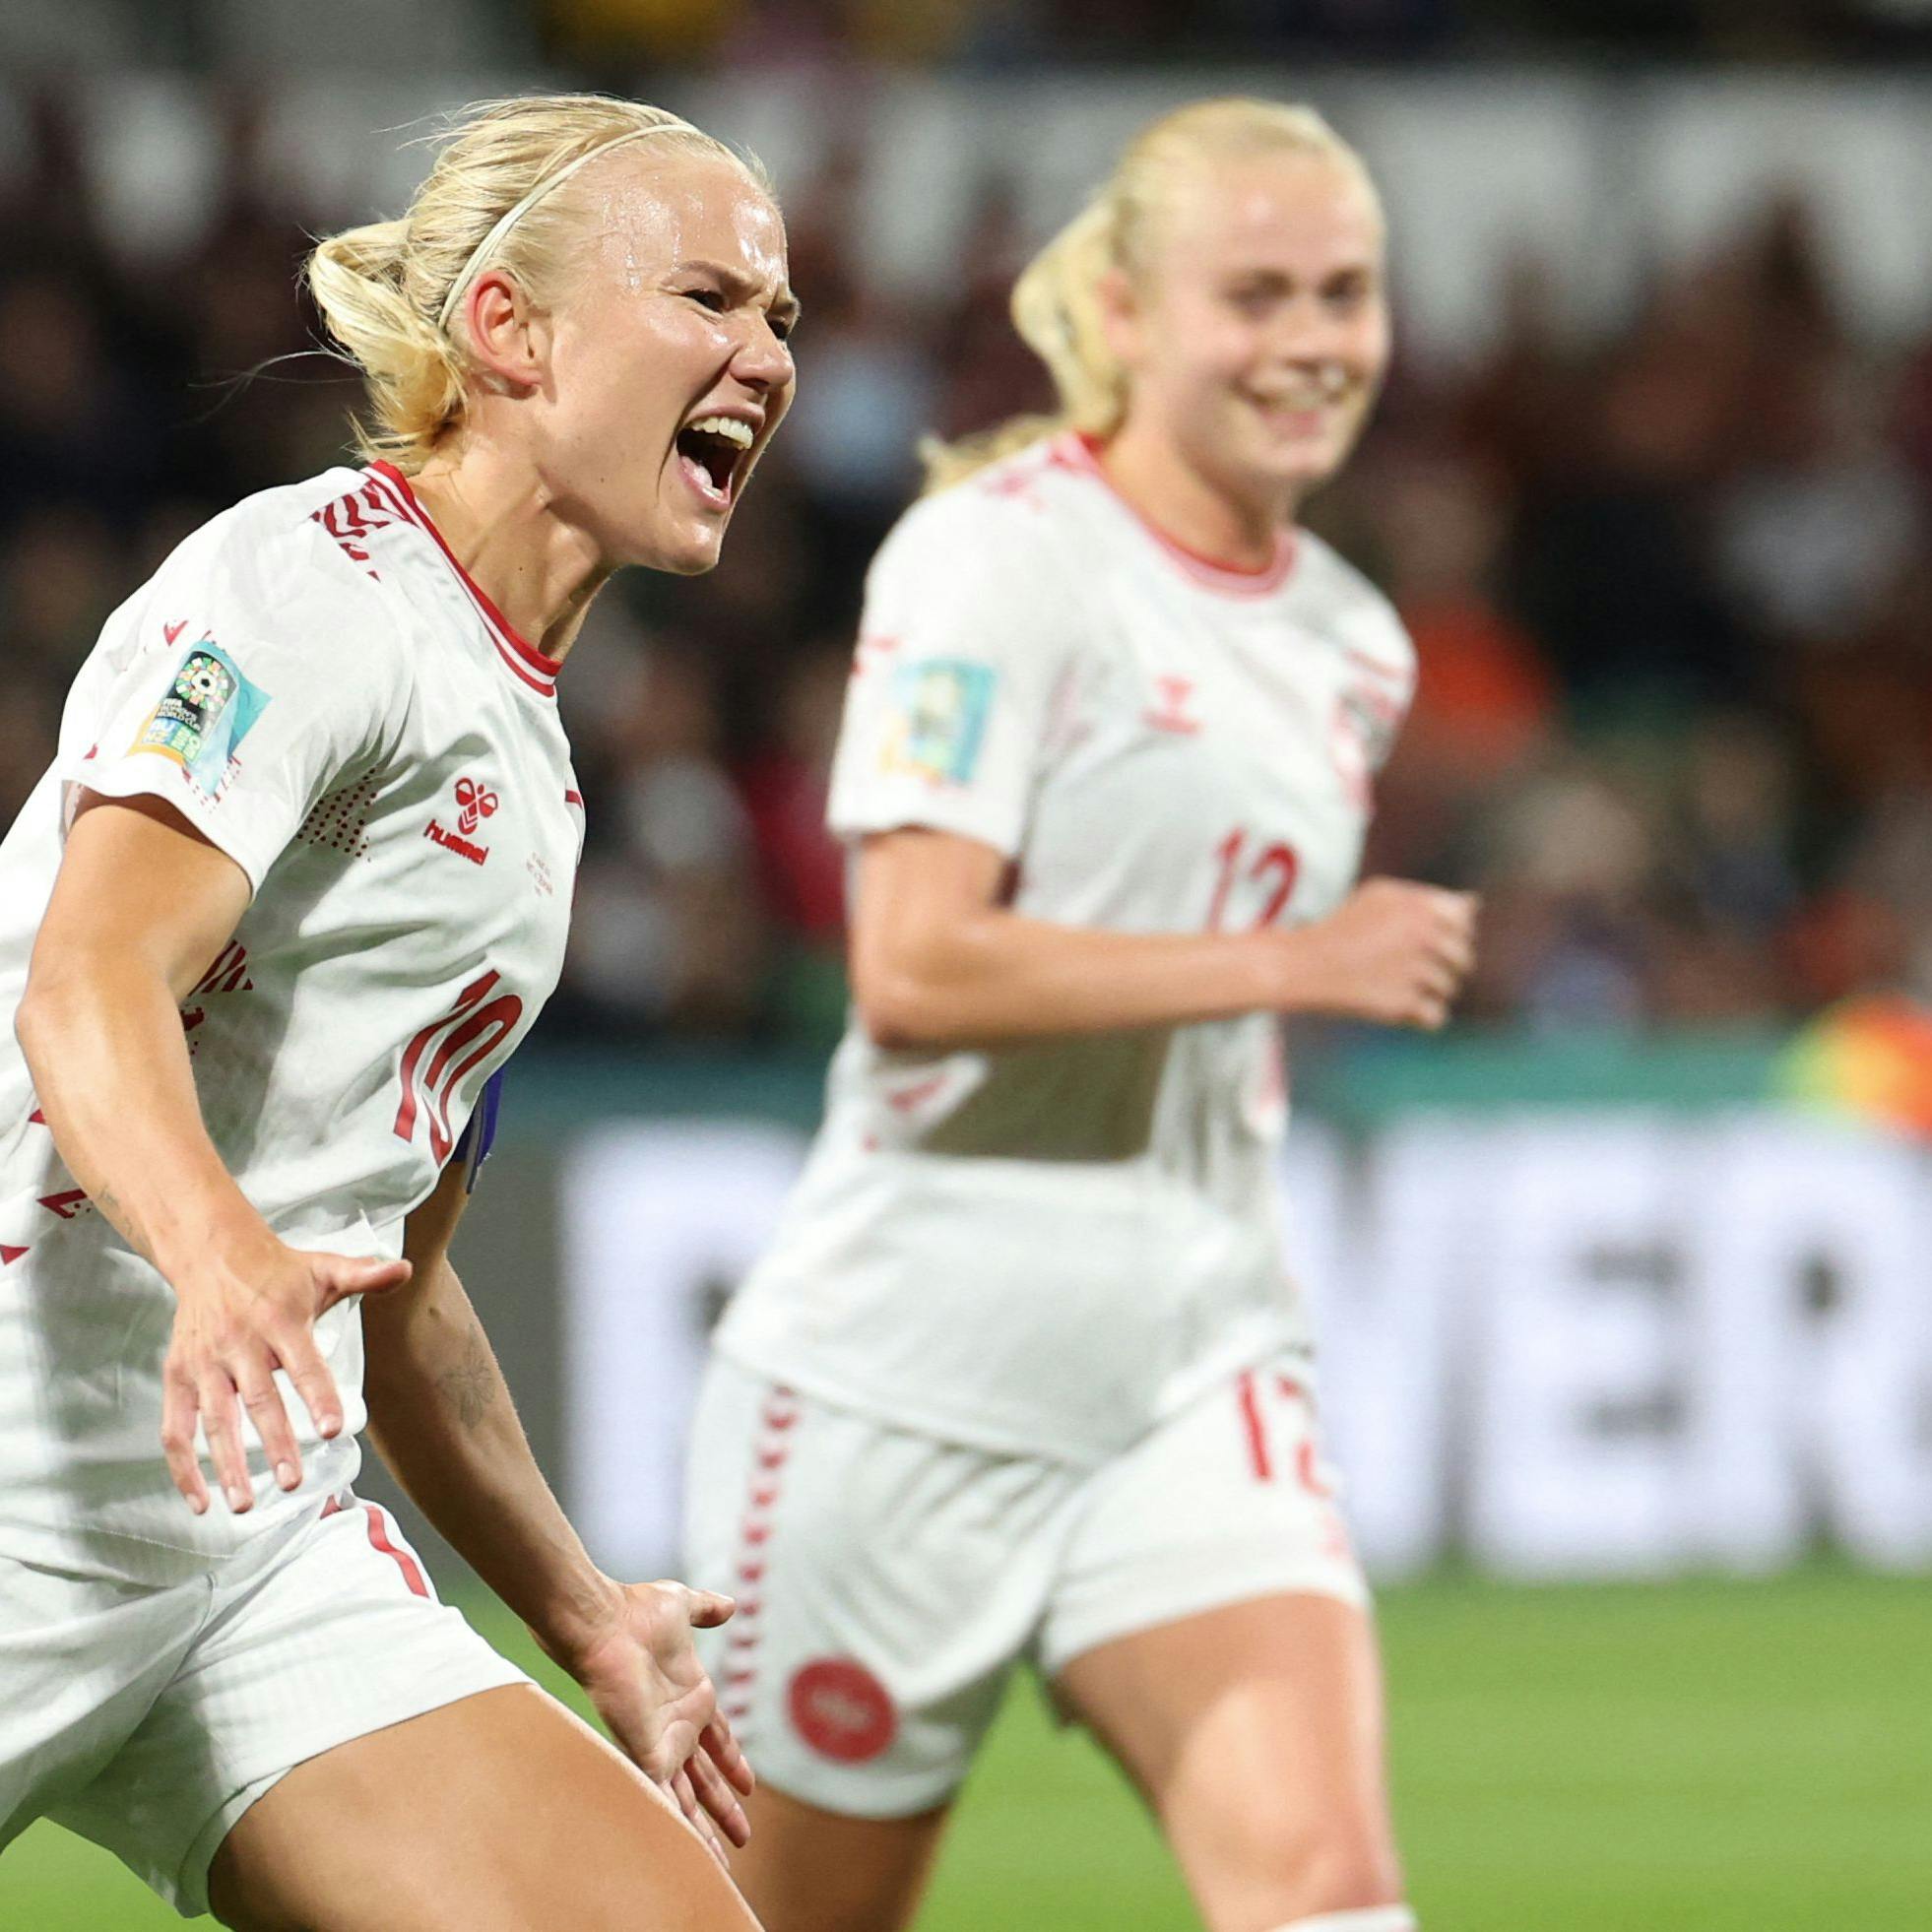 TOPSHOT - Denmark's forward #10 Pernille Harder celebrates scoring her team's first goal during the Australia and New Zealand 2023 Women's World Cup Group D football match between Haiti and Denmark at Perth Rectangular Stadium in Perth on August 1, 2023. (Photo by Colin MURTY / AFP)